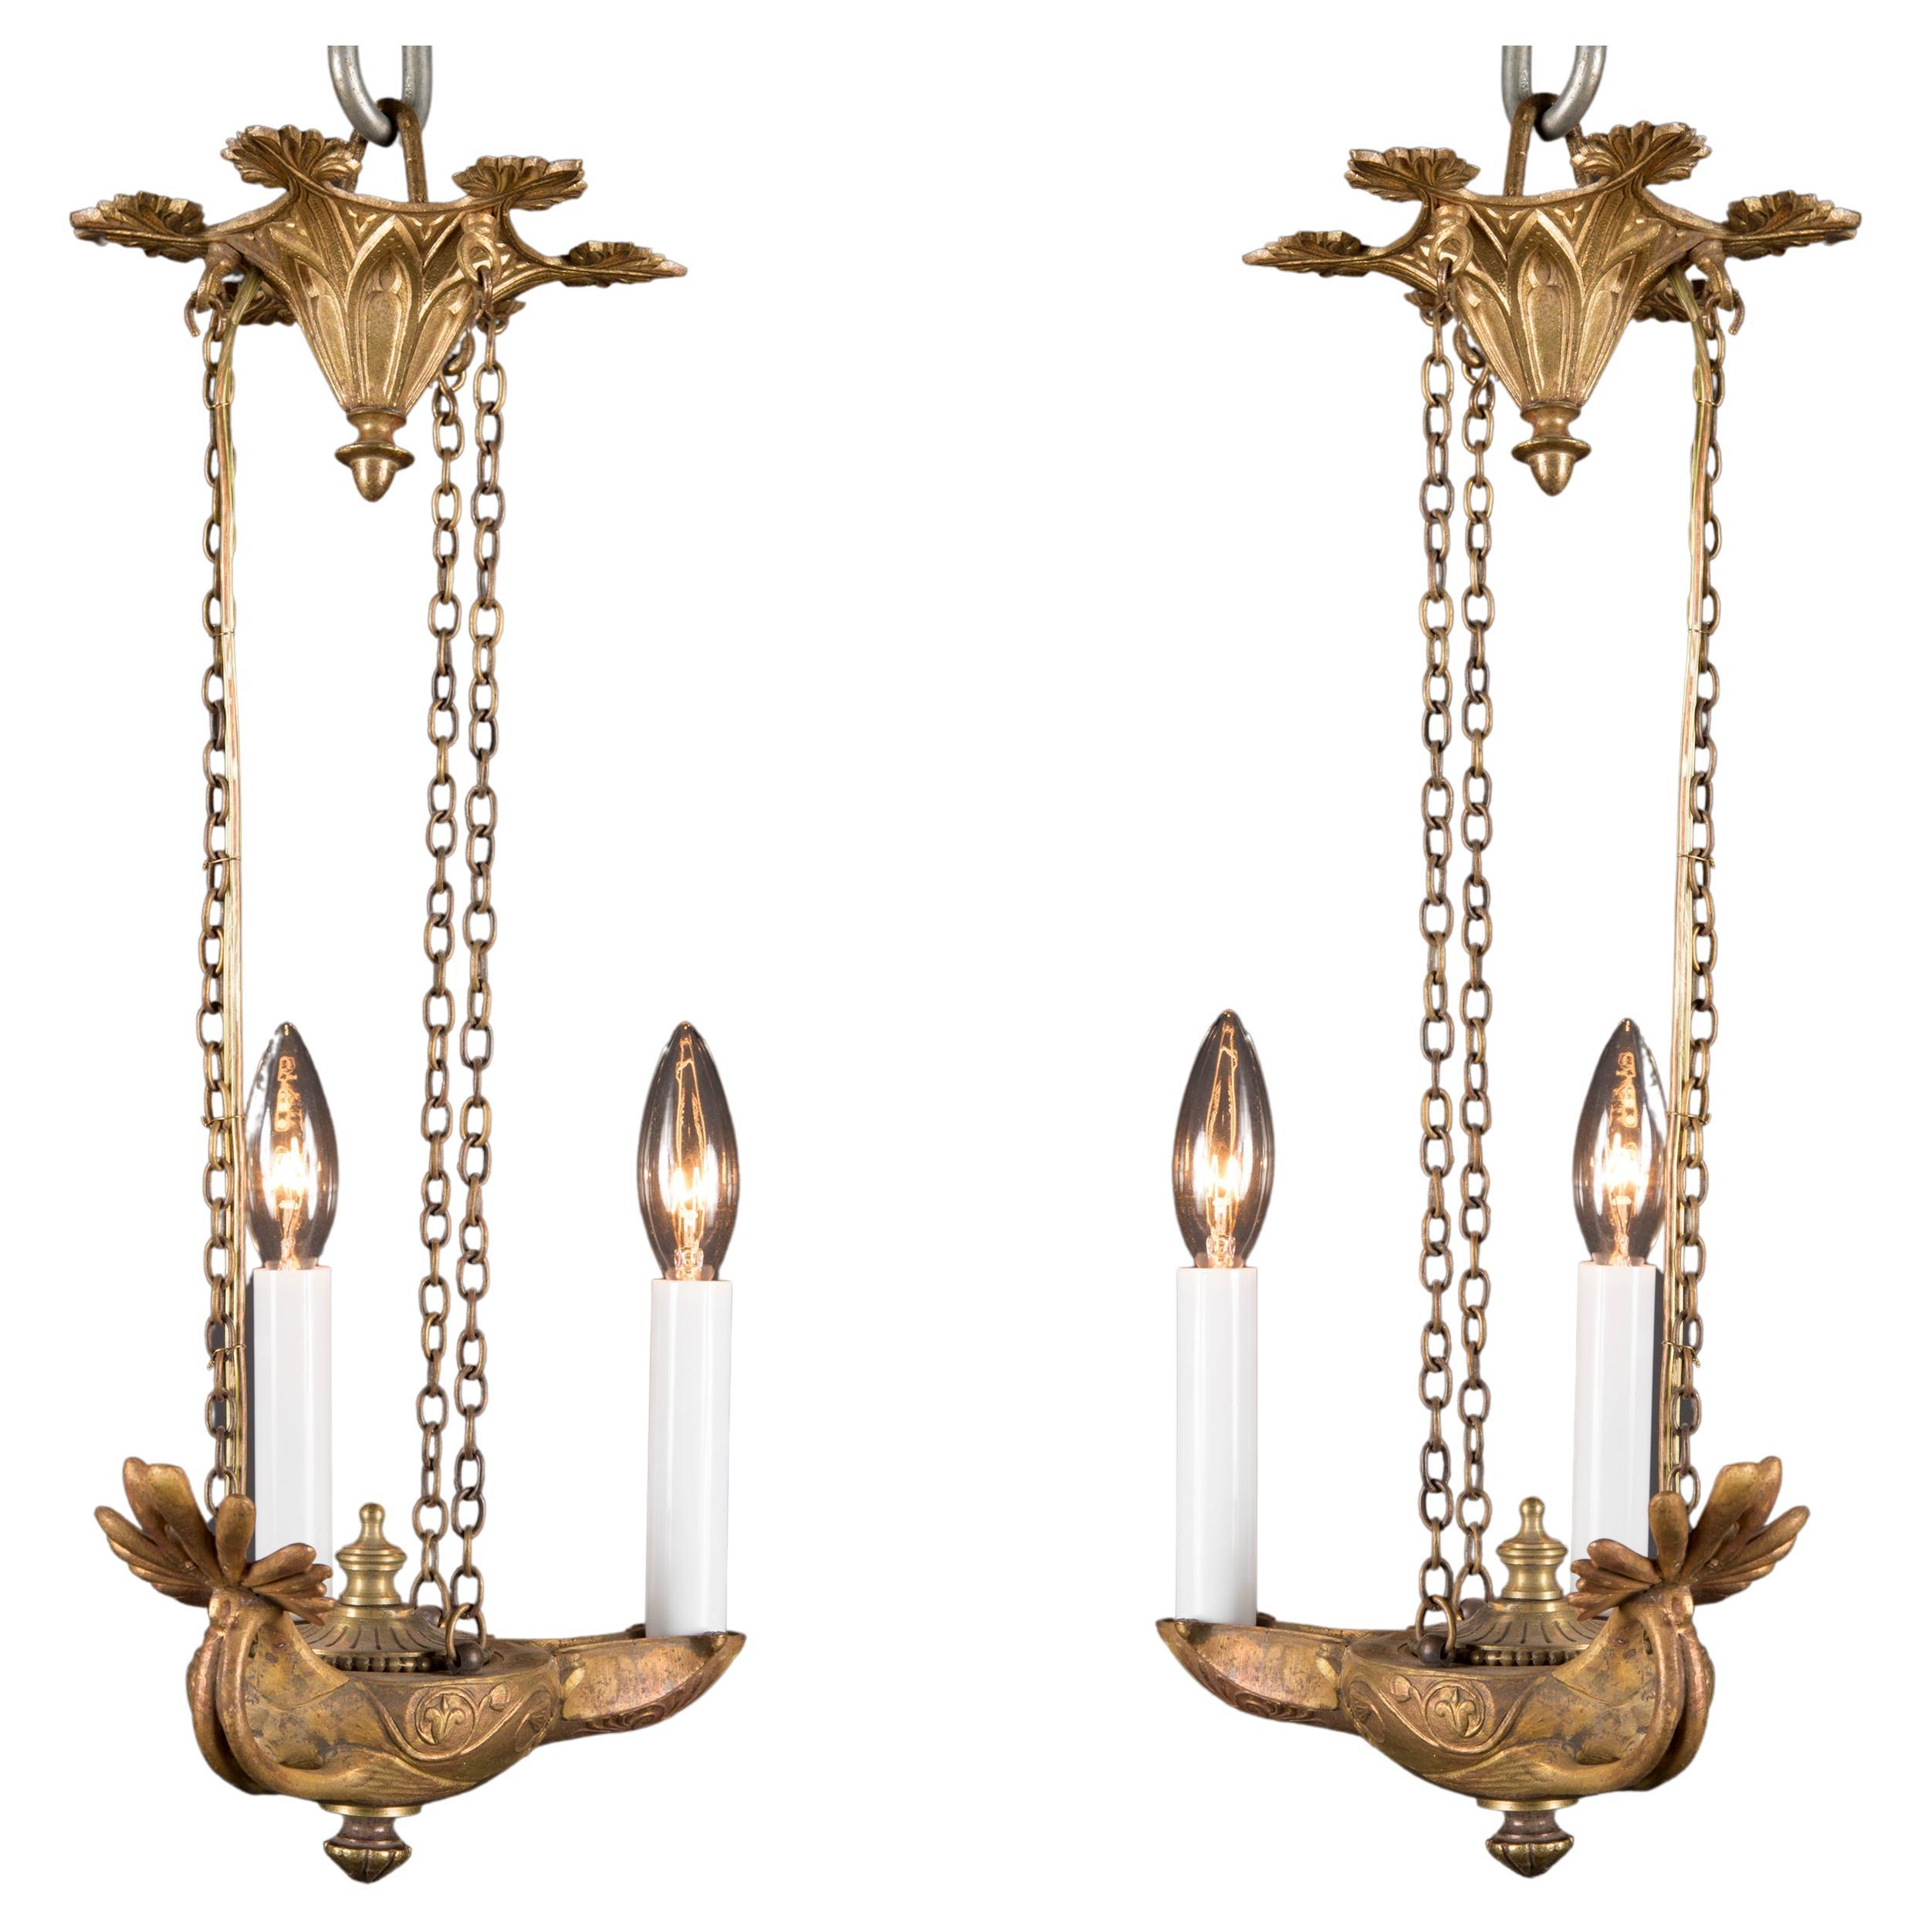 Pair of Empire Hanging Lamps, French 19th Century